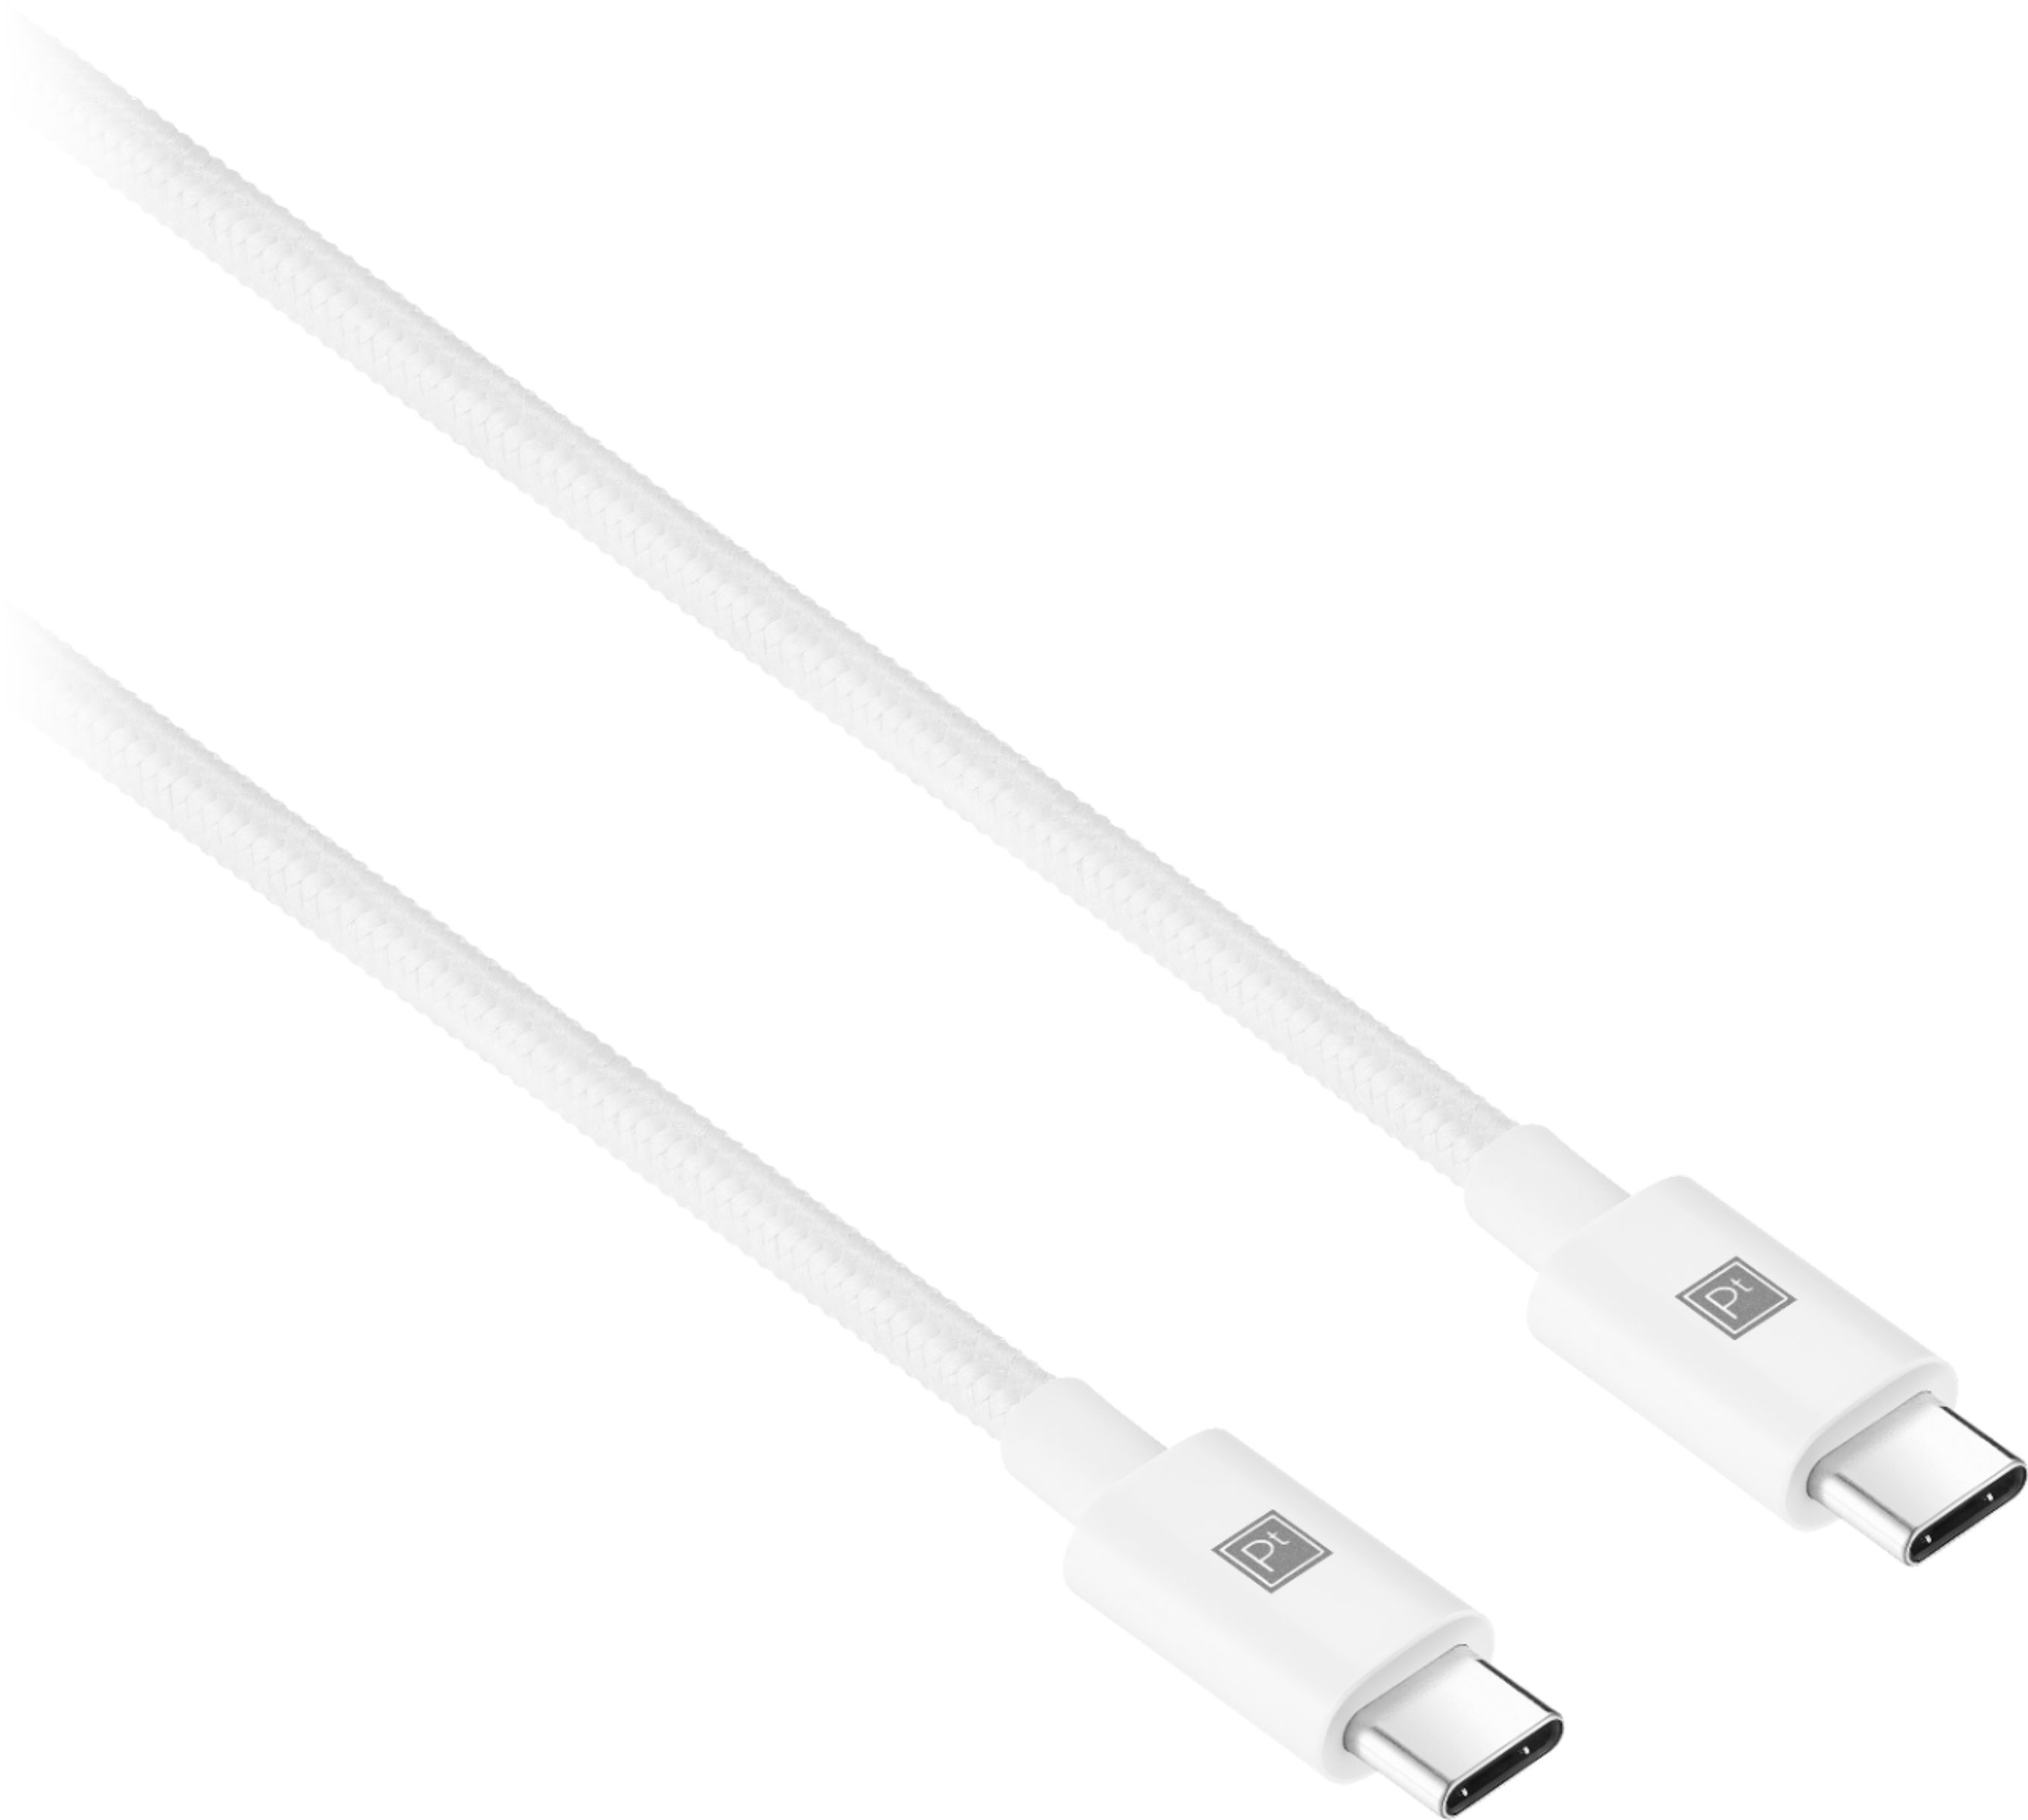 Cablelinx Elite USB Type-C to USB Type-C Braided Cable (36, White)